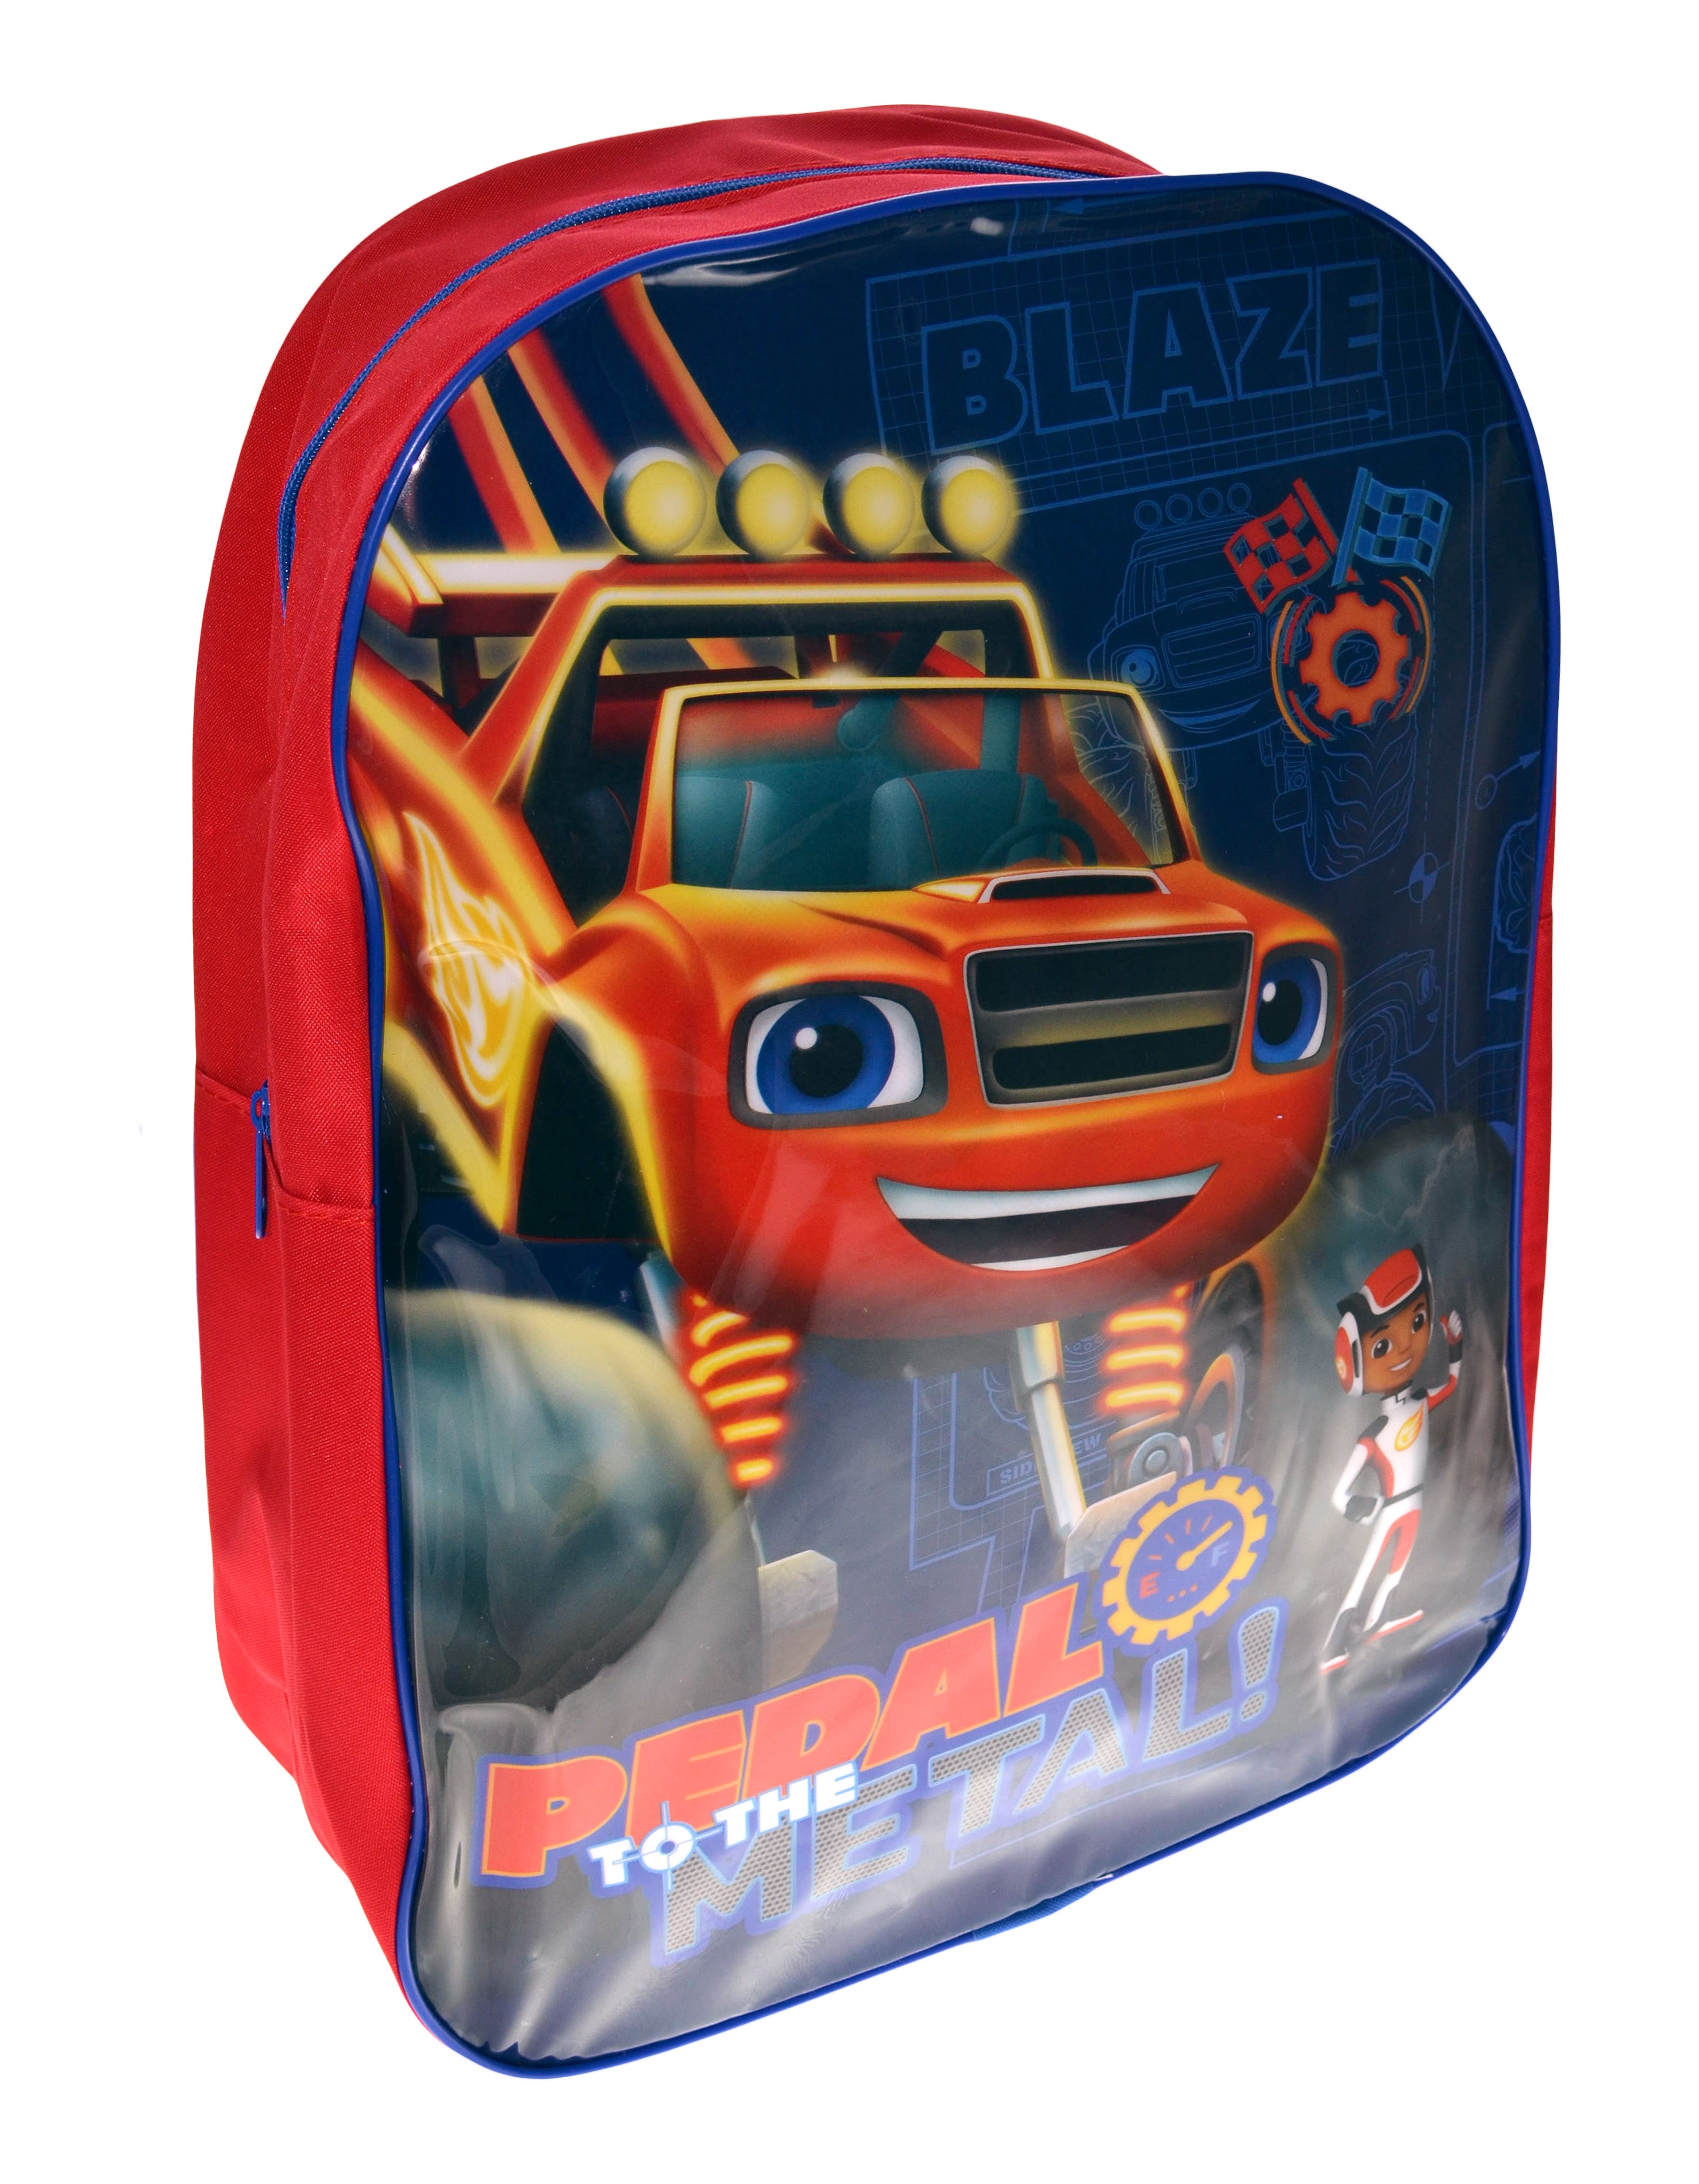 Blaze 'Pedal To The Metal' Arch School Bag Rucksack Backpack